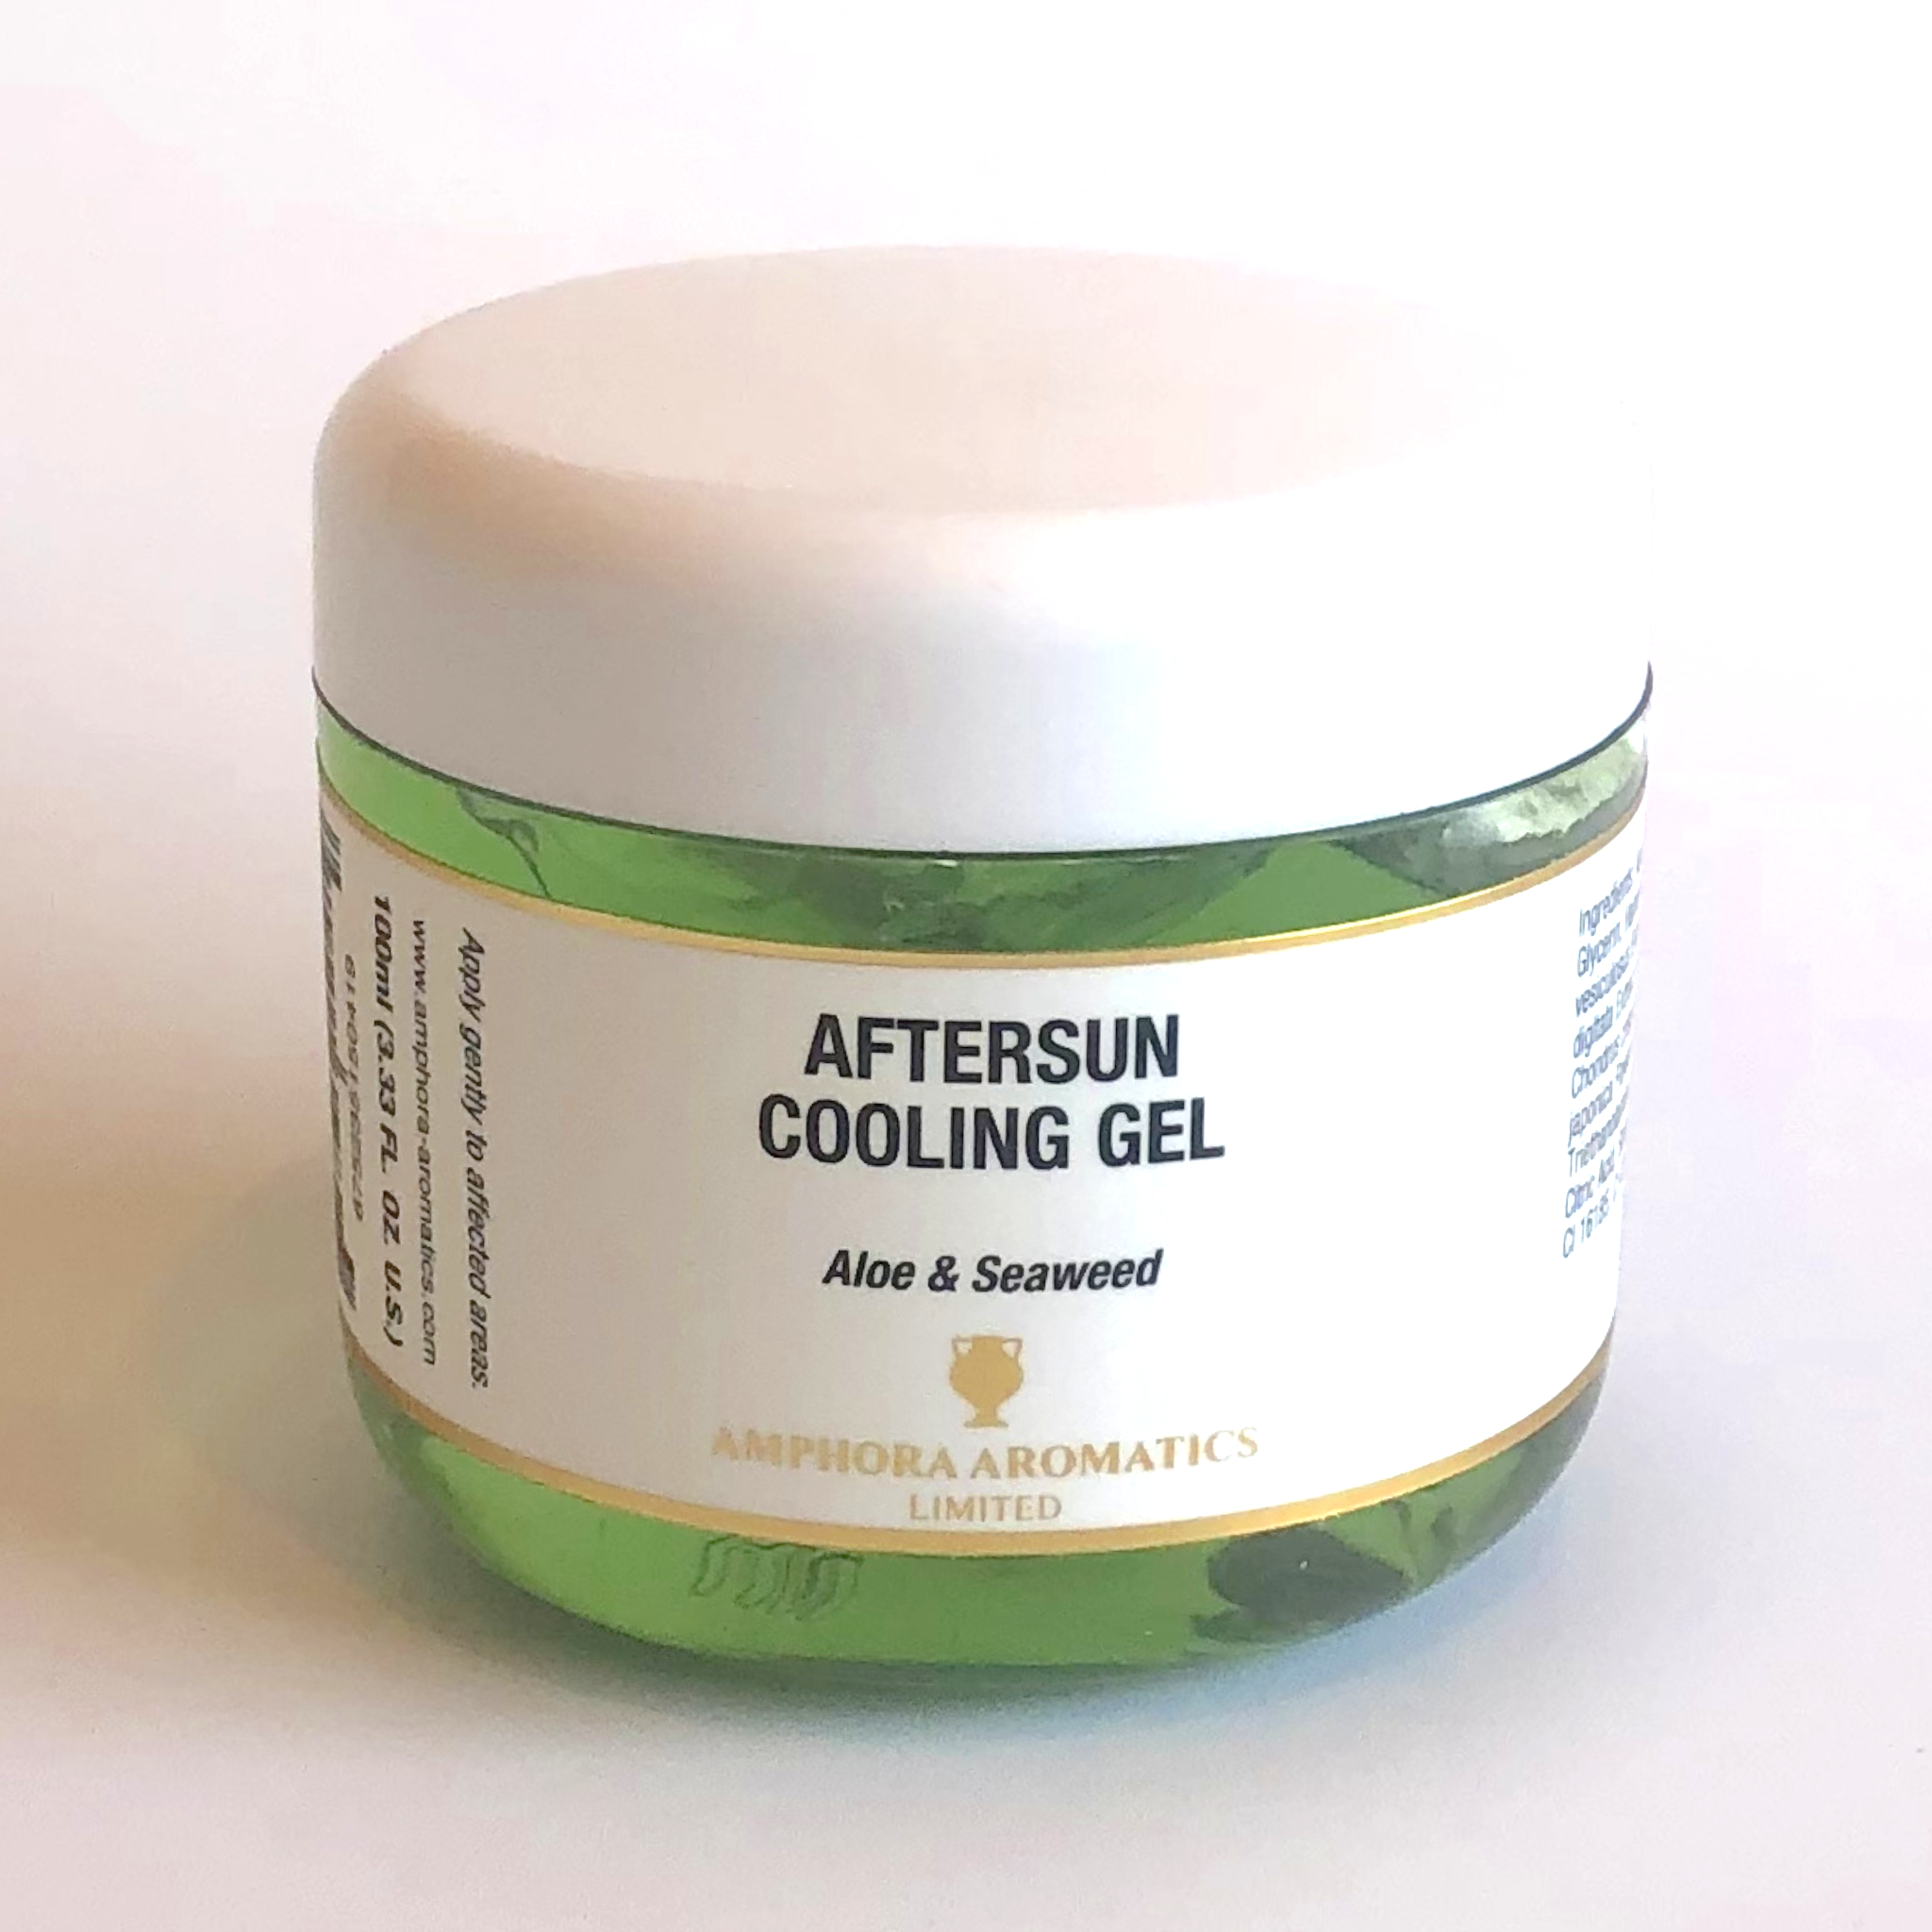 Aftersun Cooling Gel by Amphora Aromatics